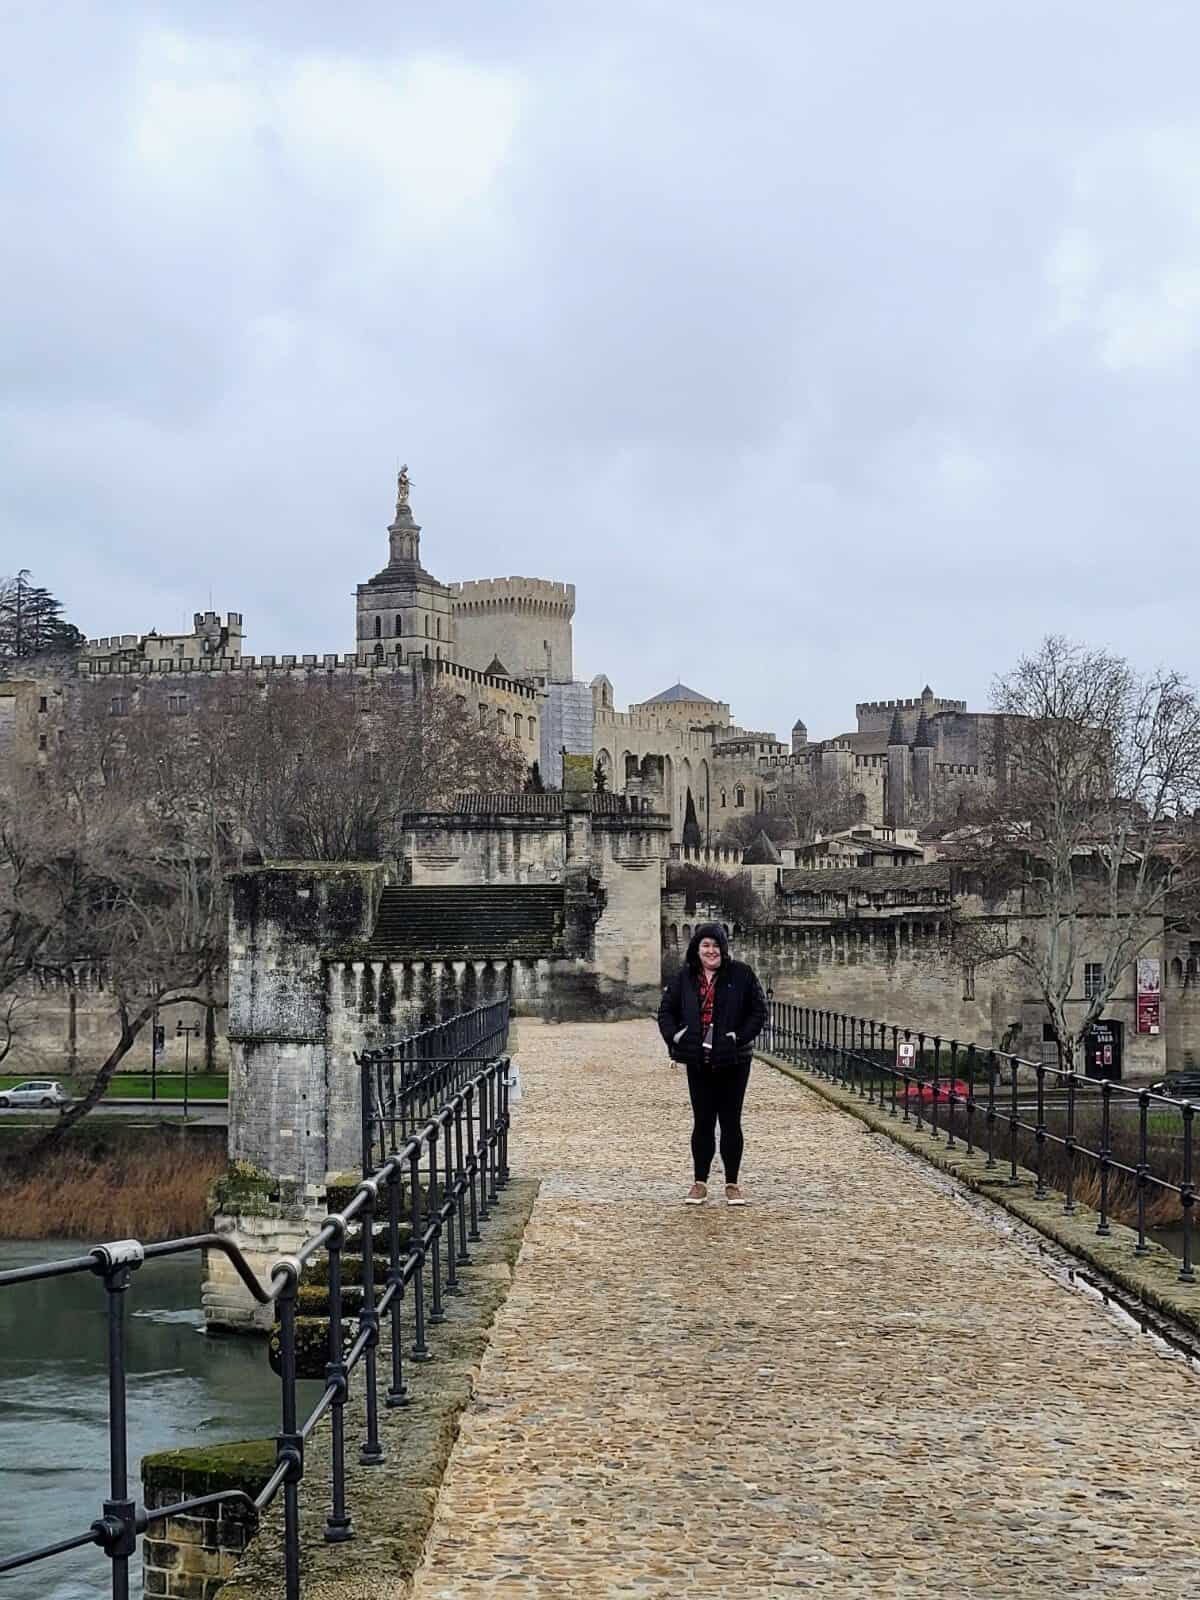 Riana standing on the Pont d'Avignon in the rain with the Palais des Papes behind her